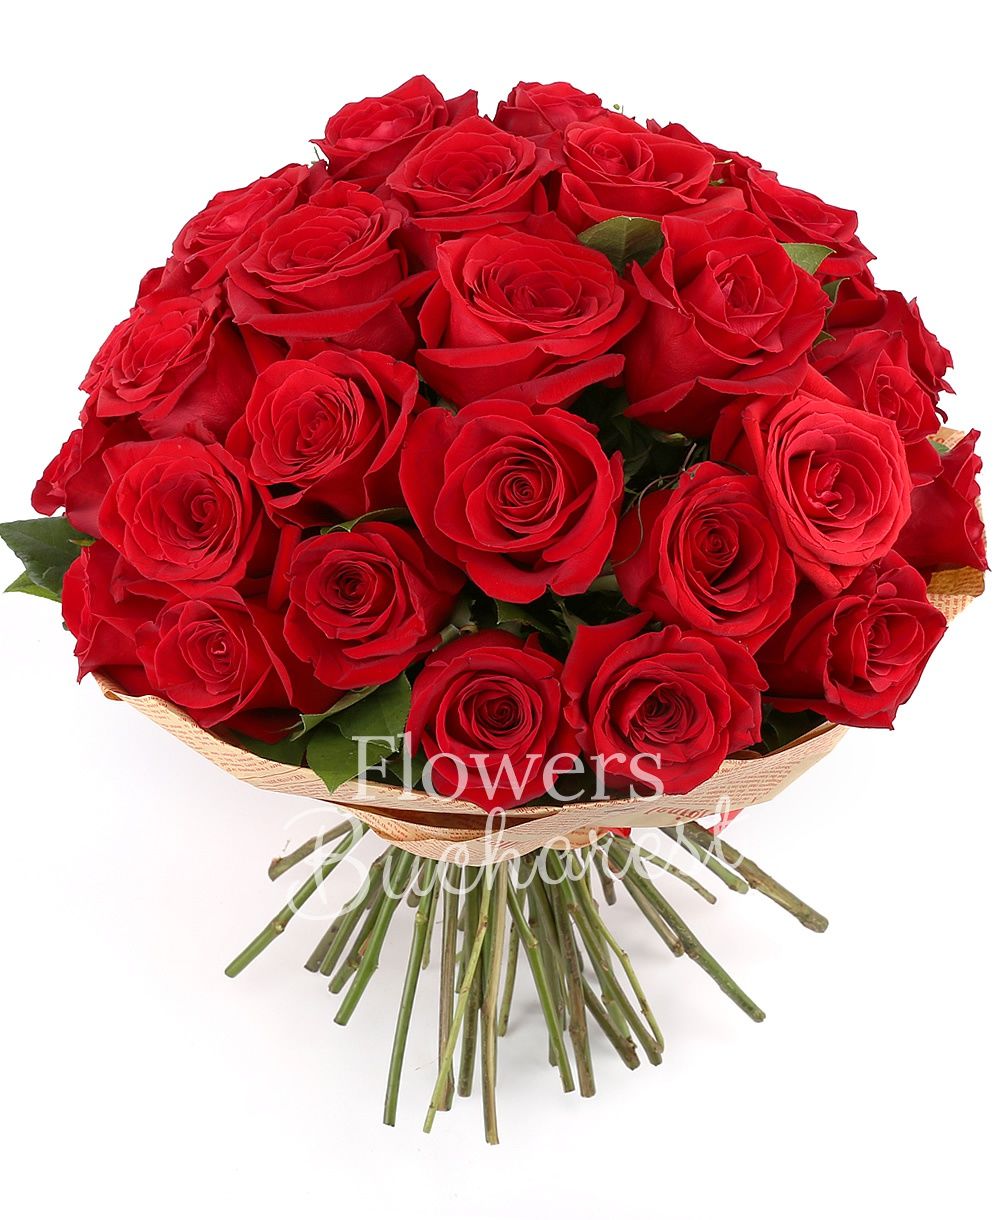 33 red roses, greenery